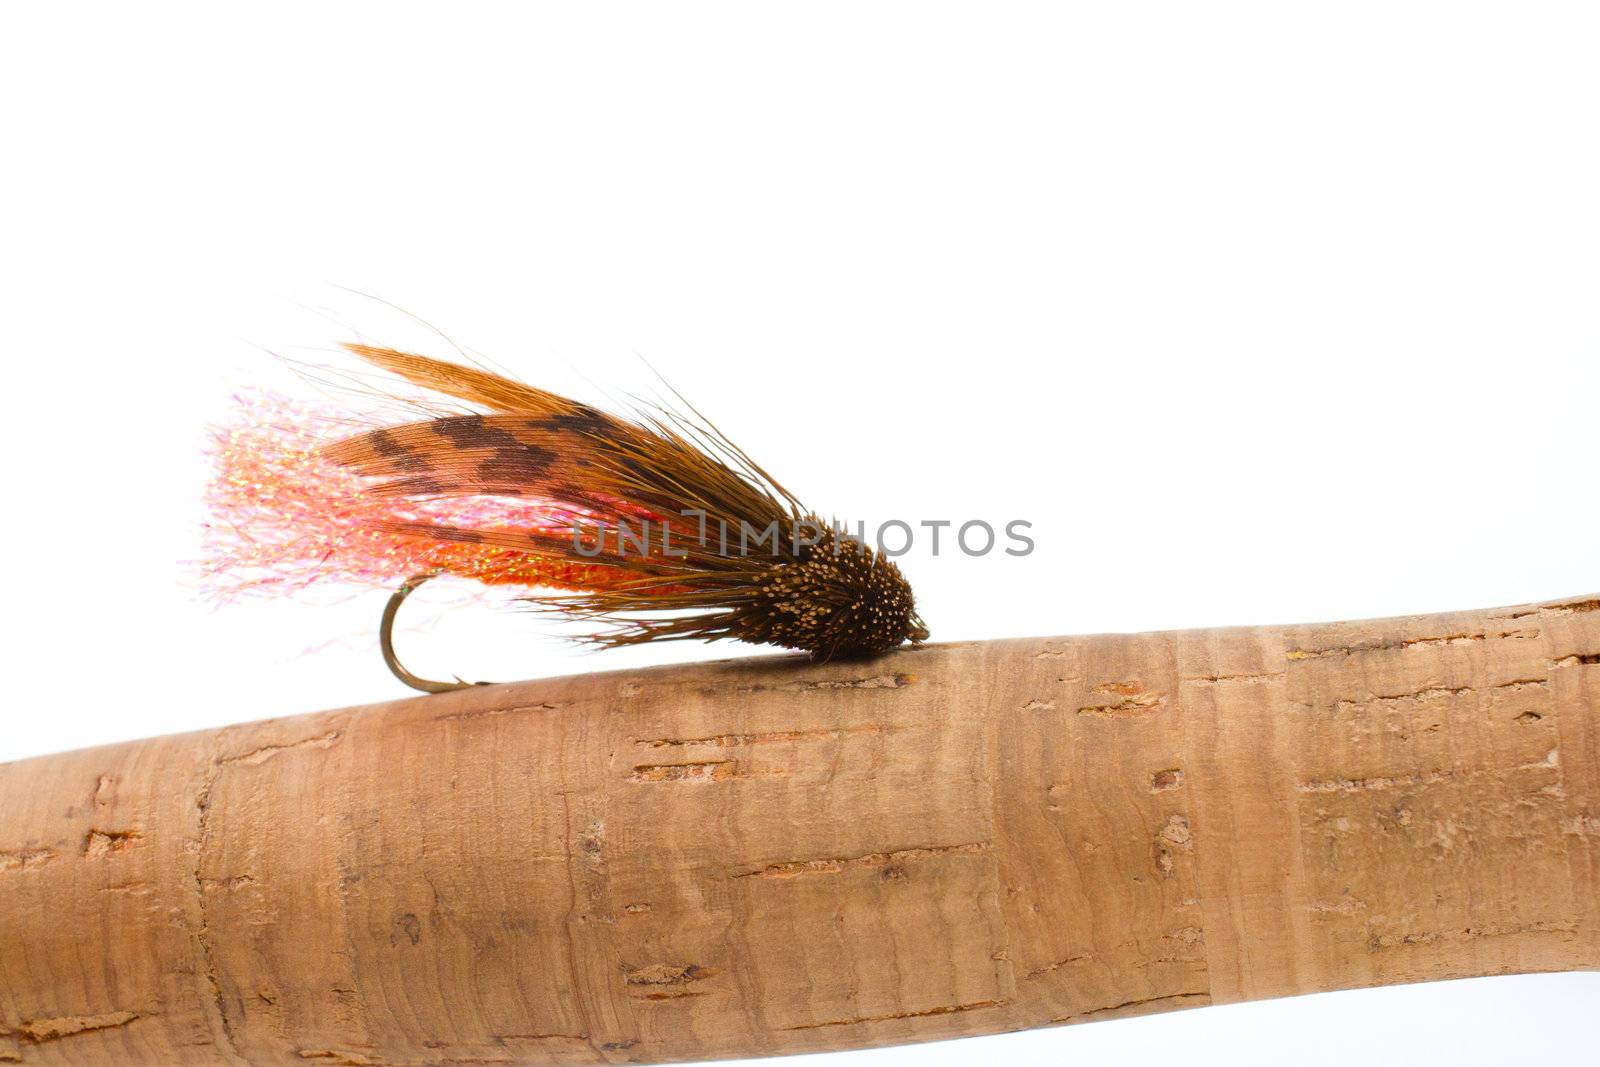 This fly fishing imitation is a muddler minnow used to skate for trout or steelhead.